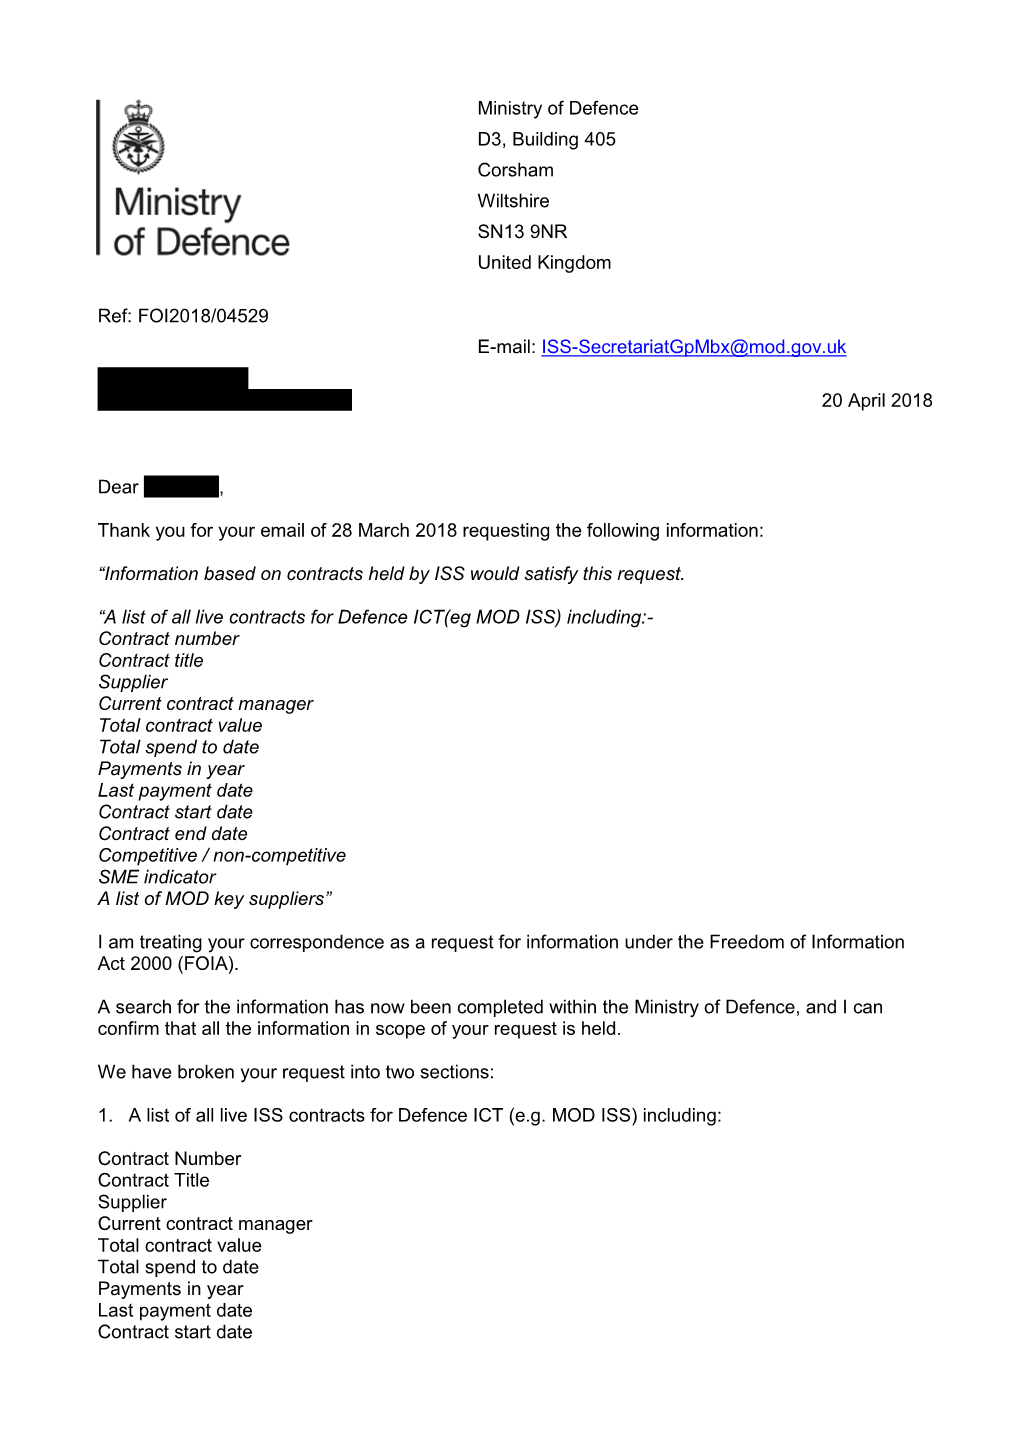 Information Regarding MOD ICT Contracts at 28 March 2018